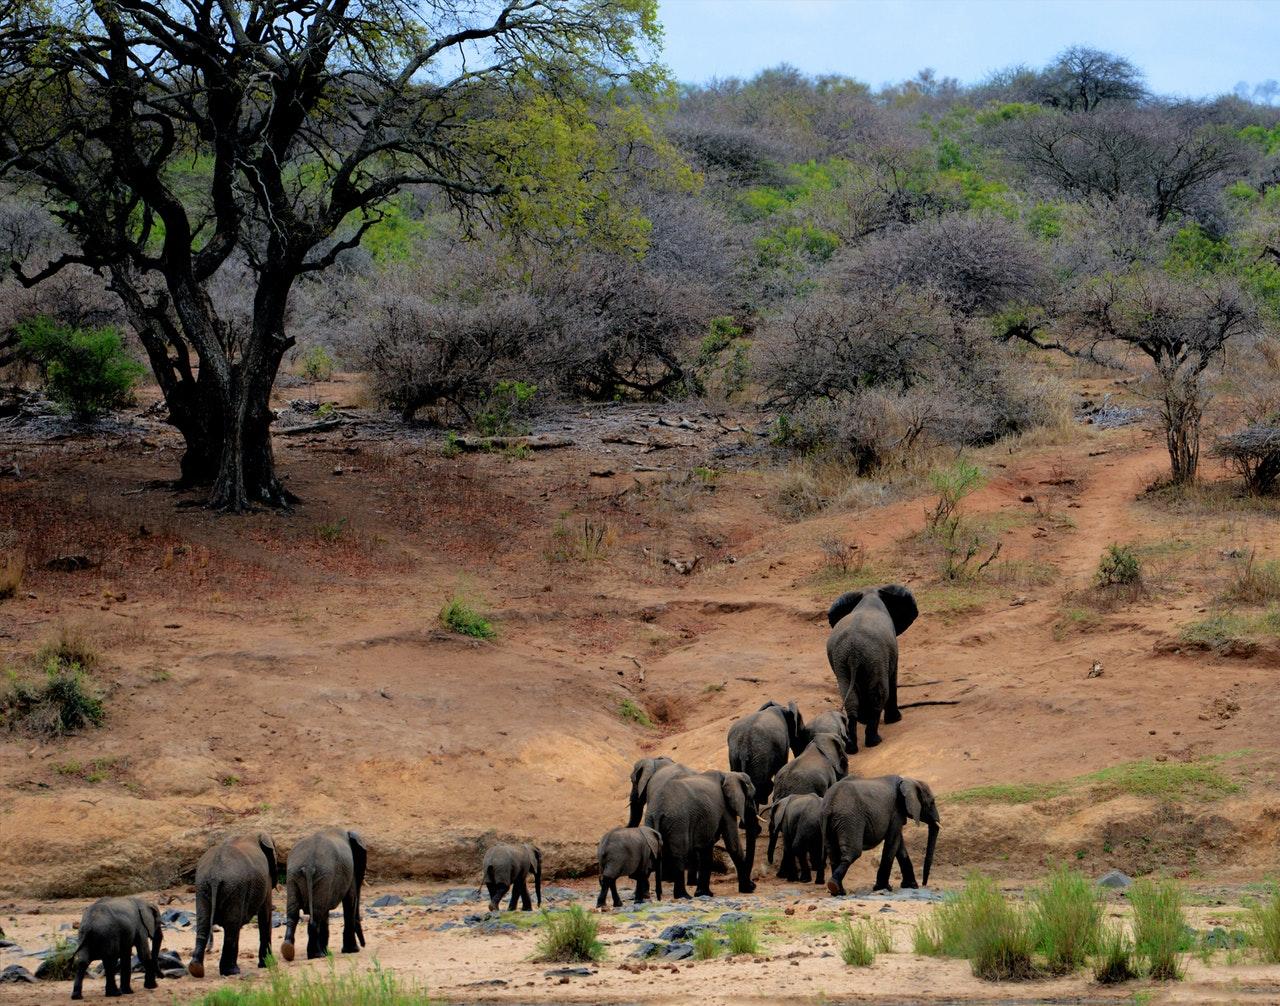 Africa's overall elephant population is on the decline due to poaching. Photo: Pexels